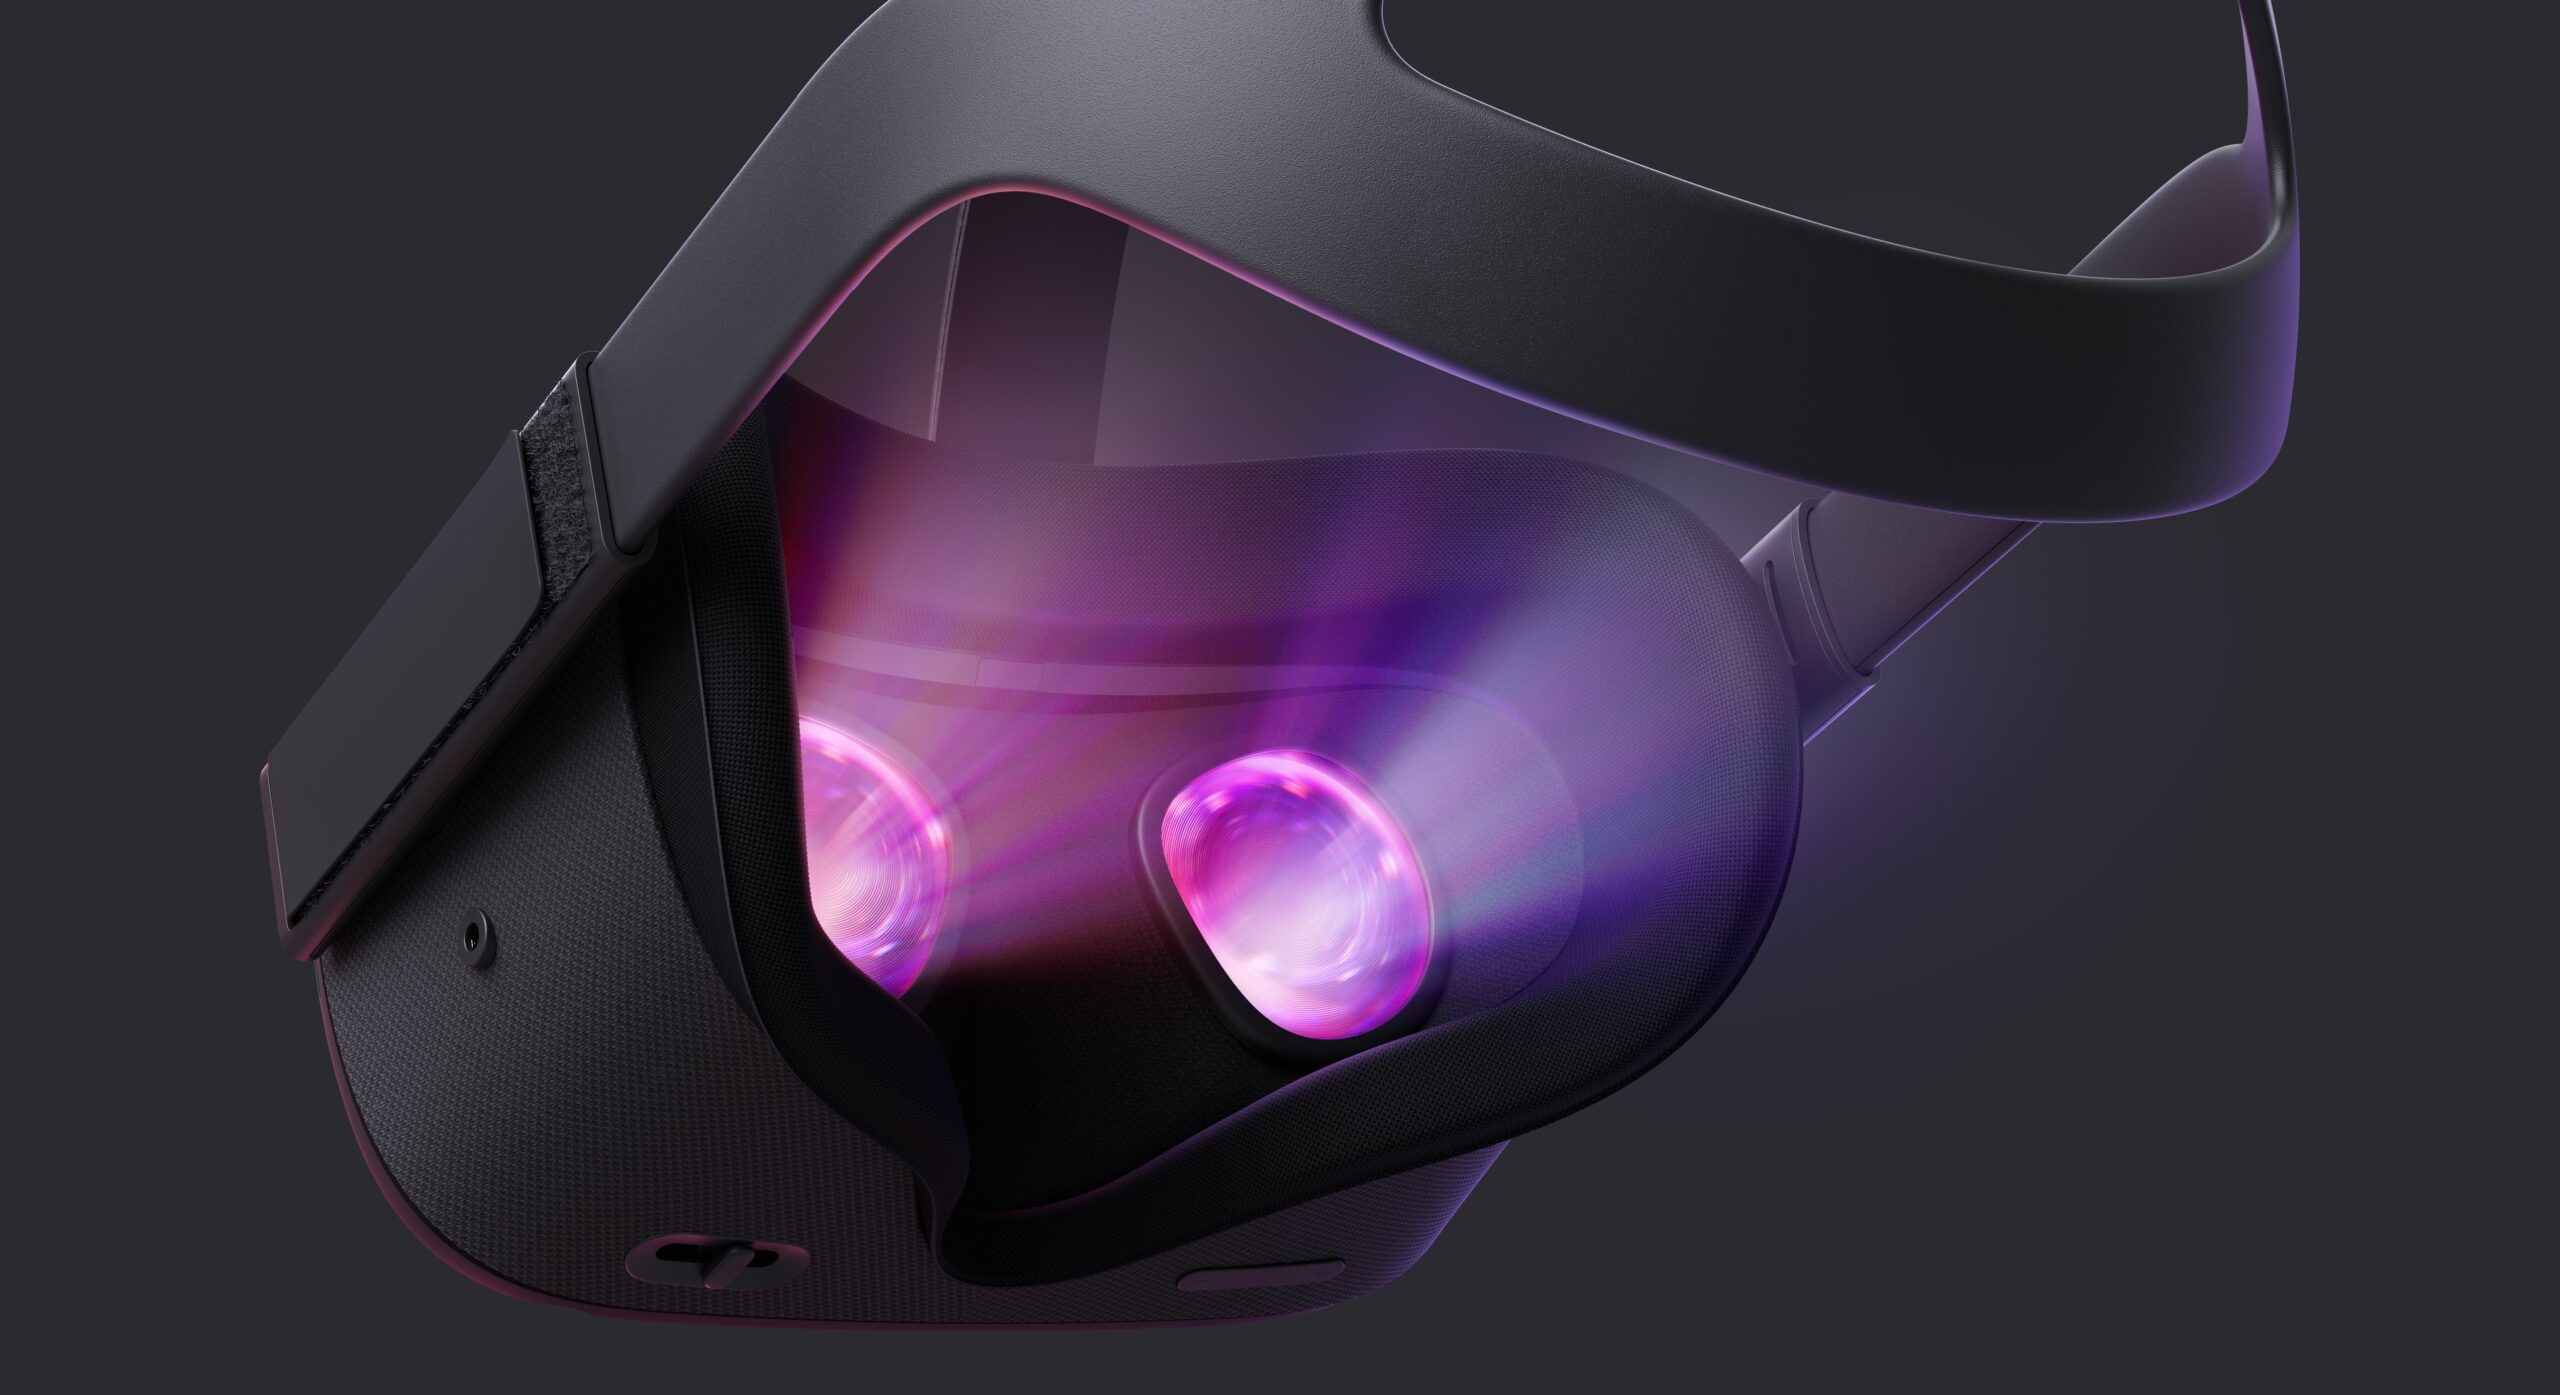 Oculus Quest Overview and Impact in VR